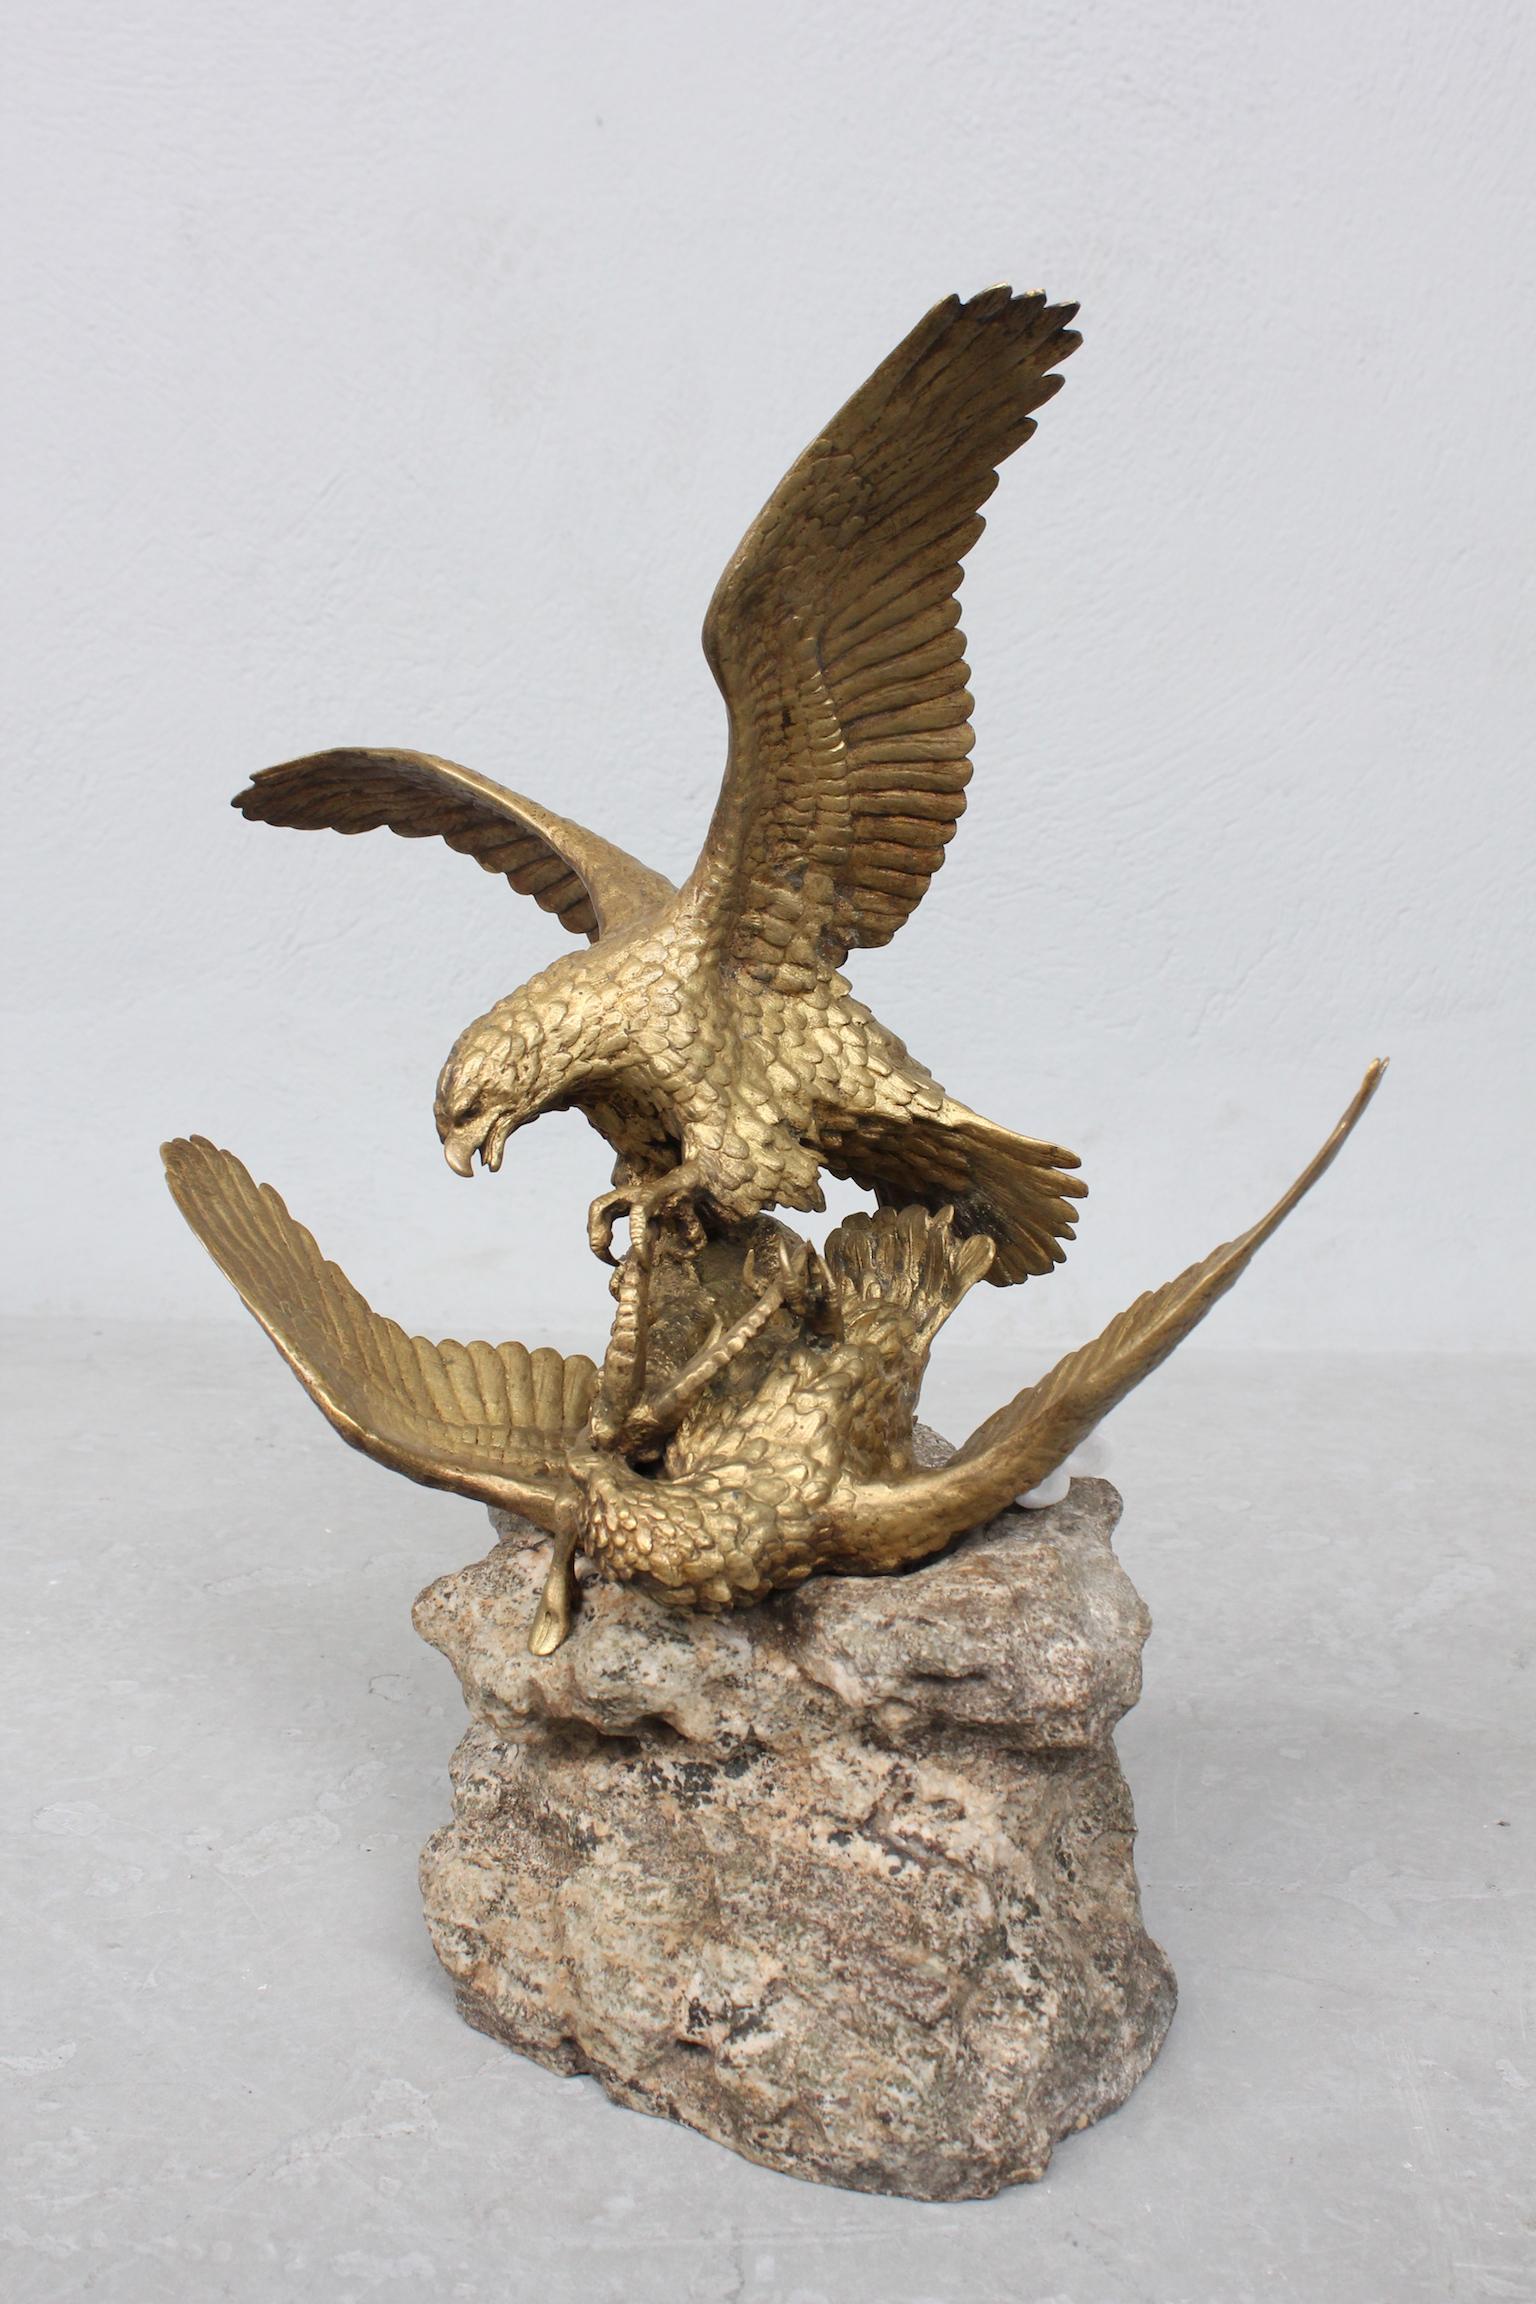 19th century bronze by Fratin representing two eagles attacking an ibex, on a granite base.
Signed Fratin on the base.
Total dimensions: Width 46cm, height 52cm, depth 20cm
Bronze only: Height 34cm, width 40cm, depth 20cm.